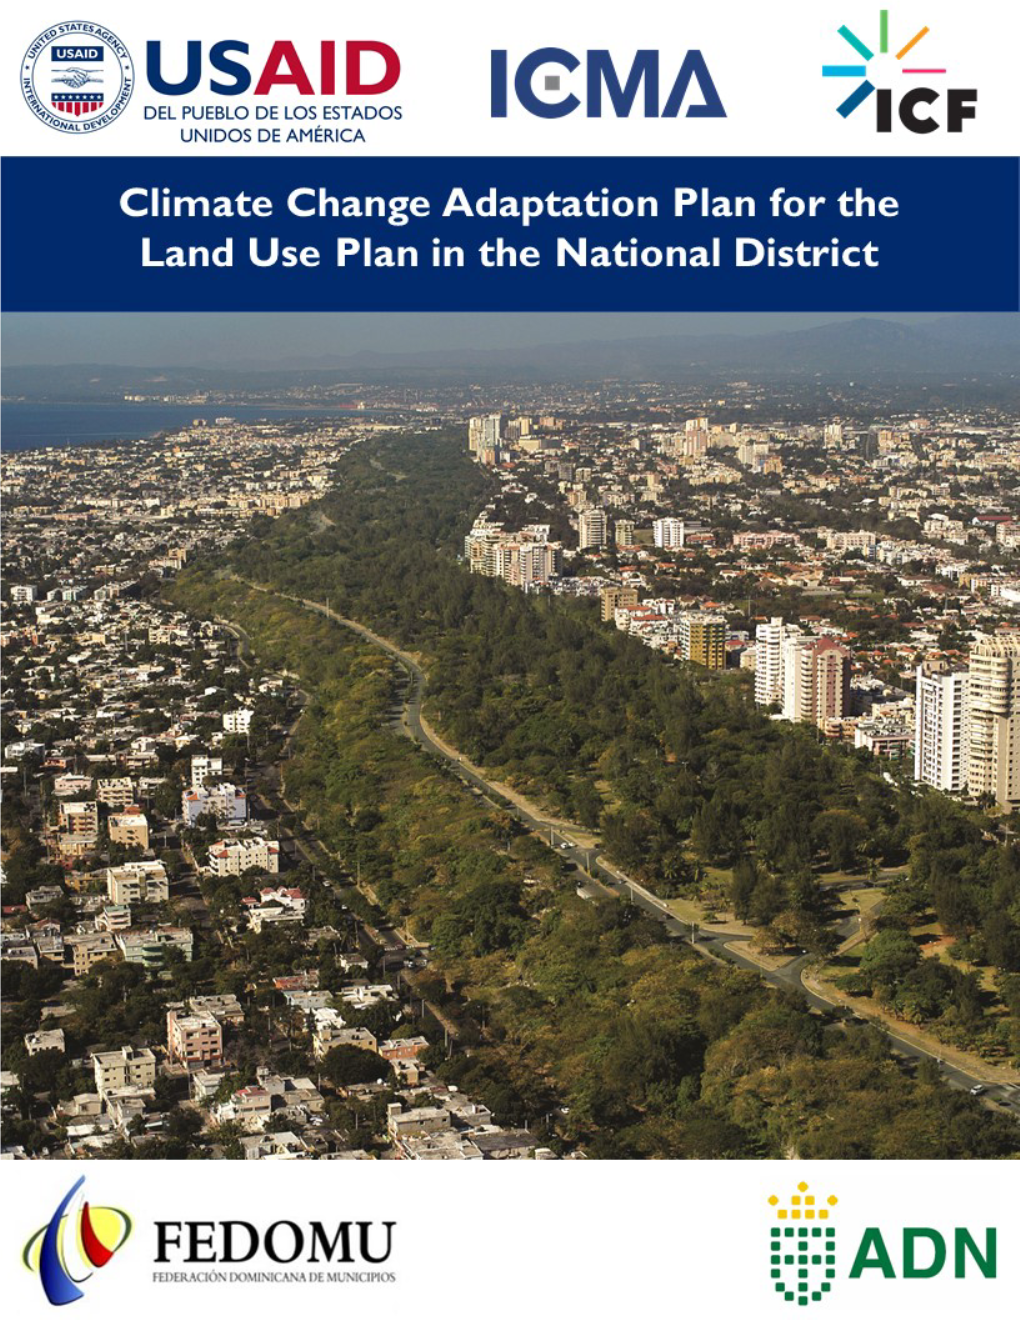 Climate Change Adaptation Plan for the Land Use Plan in the National District